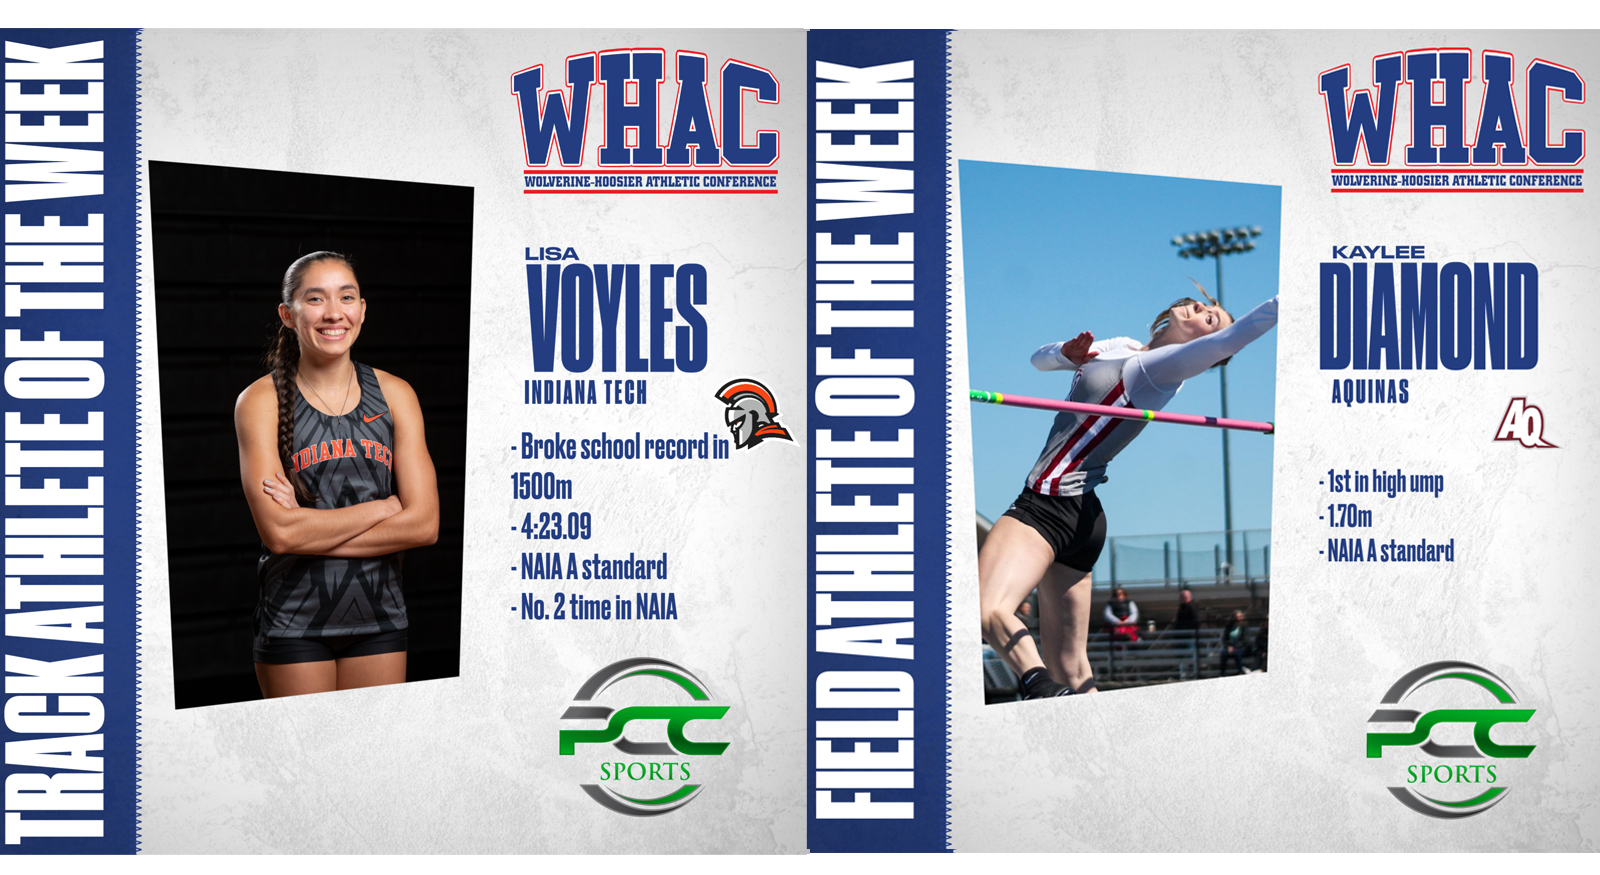 Voyles and Diamond win final Women's Track Weekly Honors